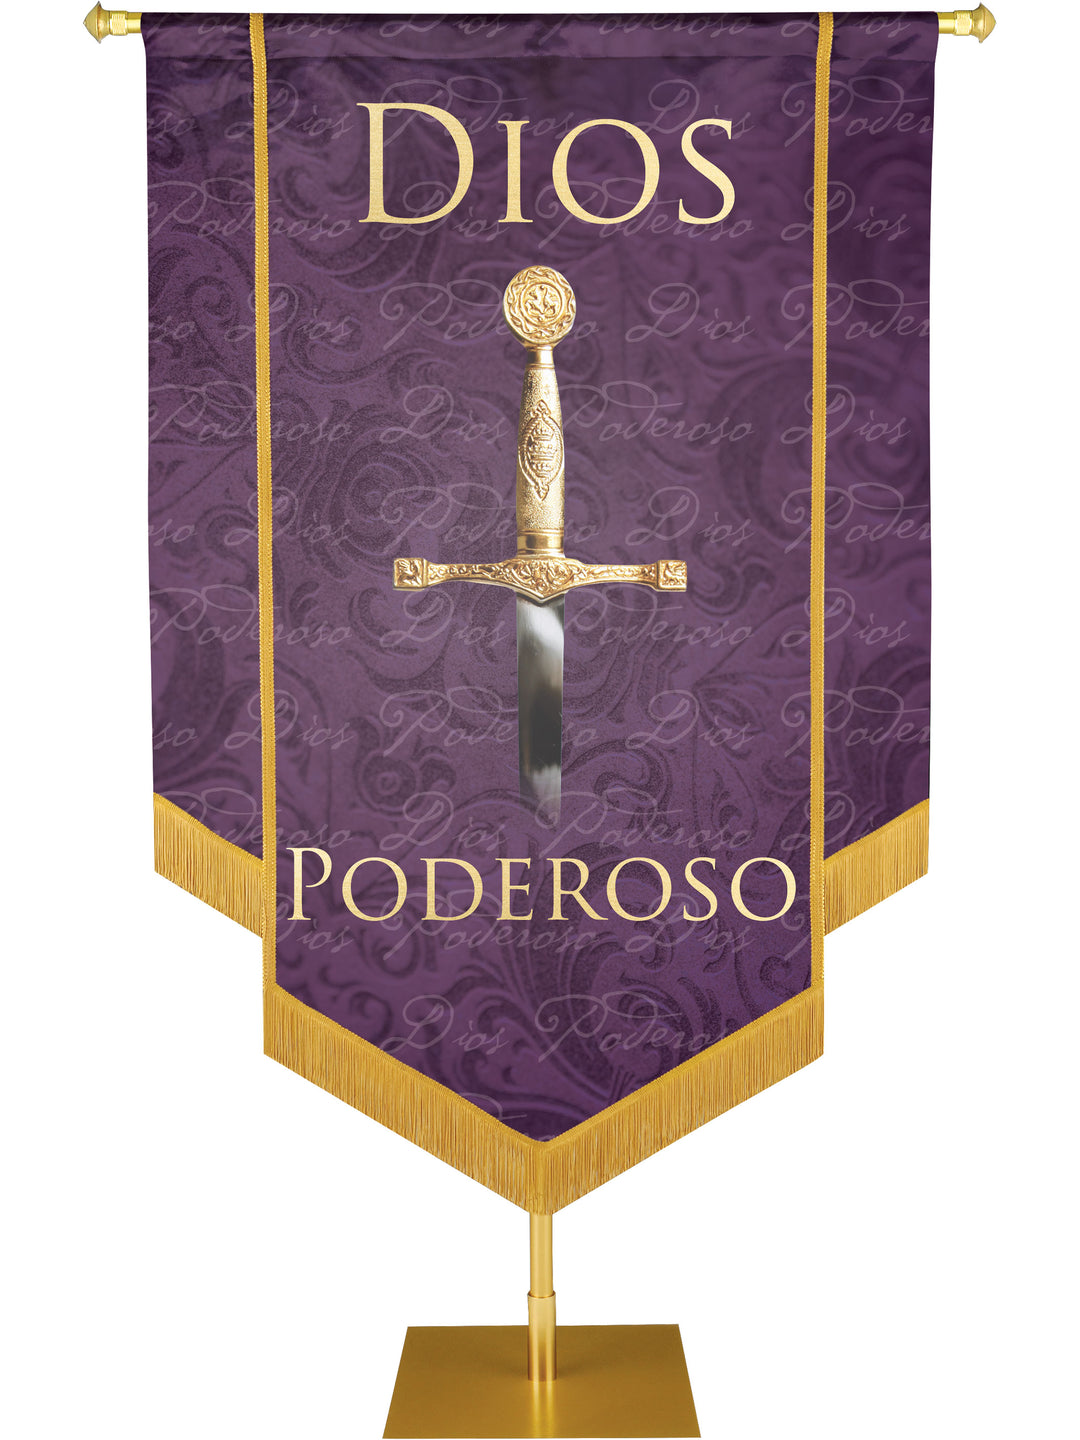 Dios Poderoso Embellished Banner - Handcrafted Banners - PraiseBanners